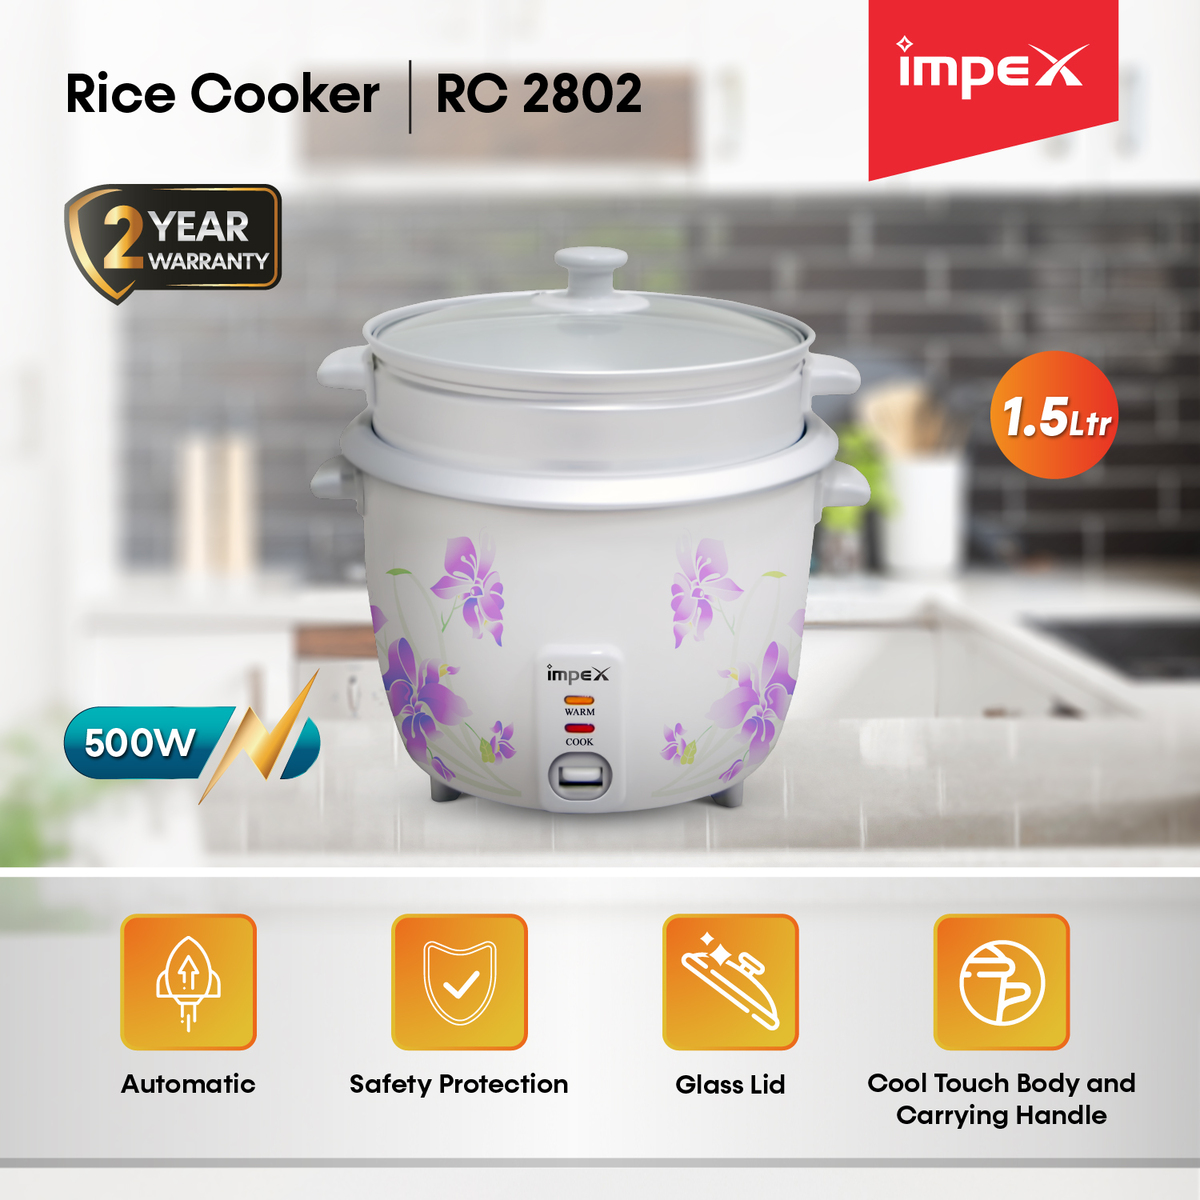 Impex RC 2802 1.5 Litre 500 W Electric Rice Cooker with Automatic Cooking